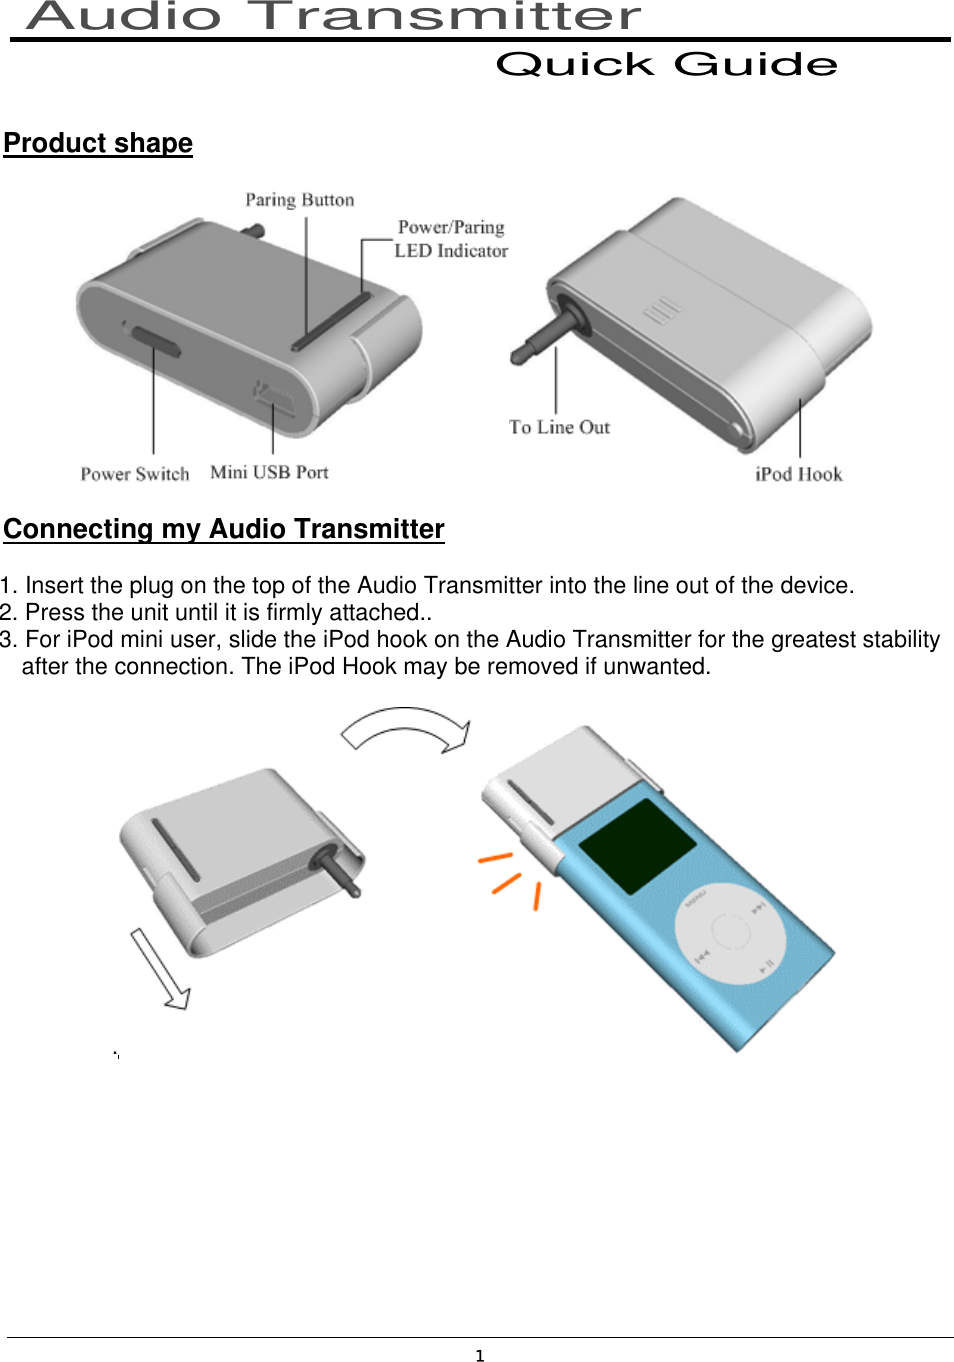 1   Product shape   Connecting my Audio Transmitter 1. Insert the plug on the top of the Audio Transmitter into the line out of the device. 2. Press the unit until it is firmly attached.. 3. For iPod mini user, slide the iPod hook on the Audio Transmitter for the greatest stability     after the connection. The iPod Hook may be removed if unwanted. .      Audio Transmitter Quick Guide 